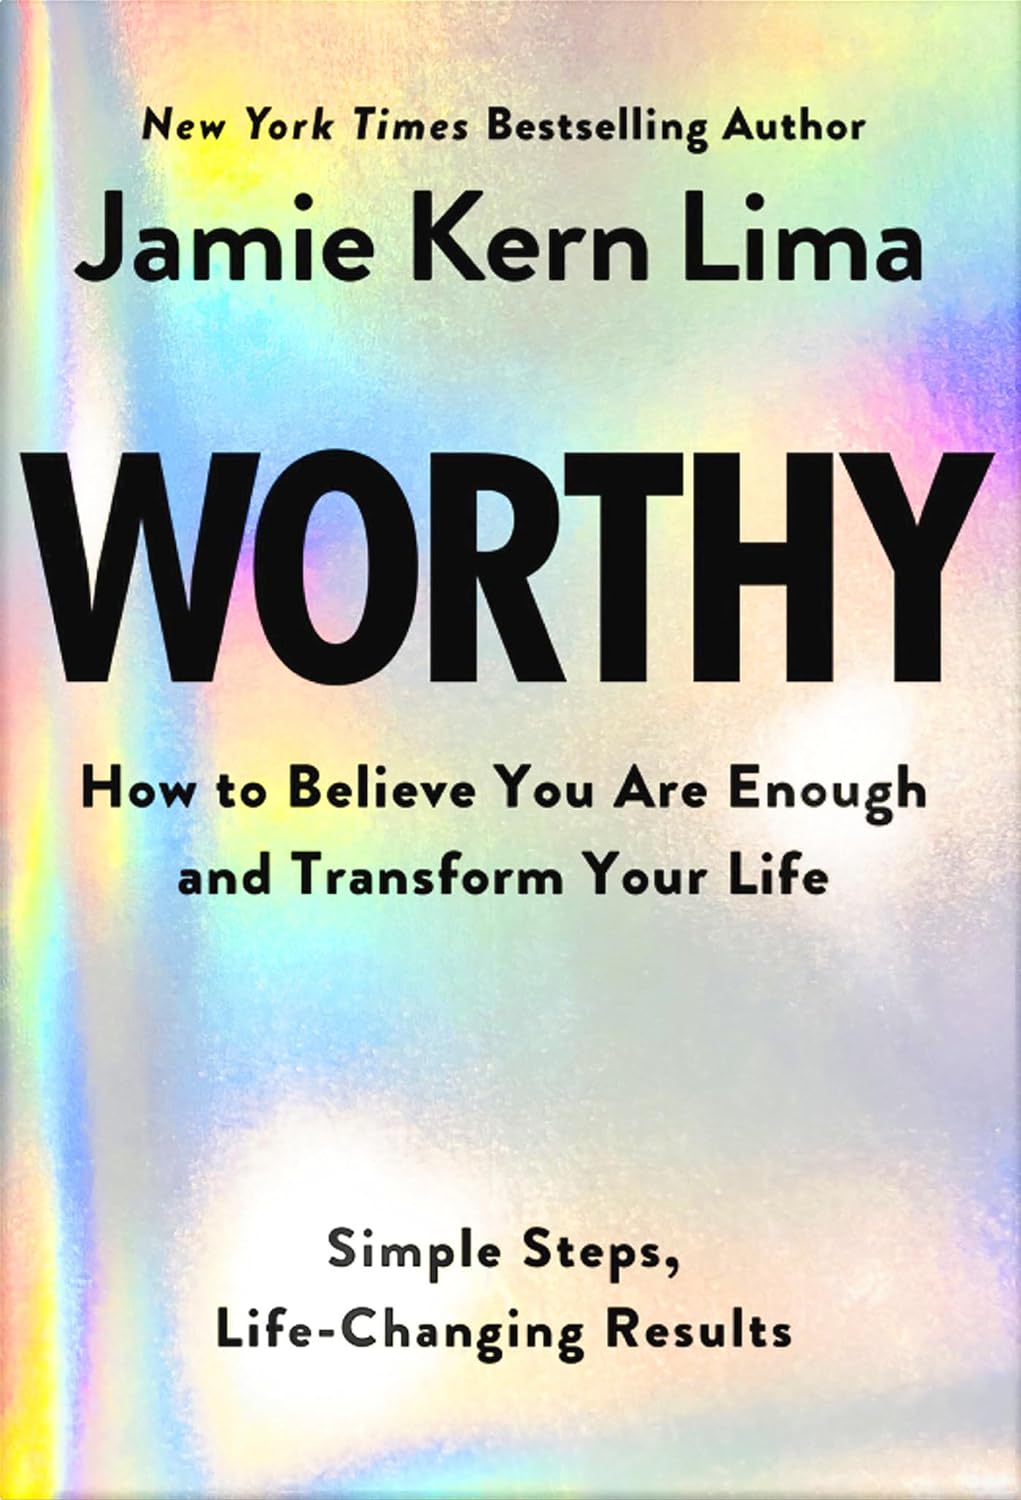 Worthy: How to Believe You Are Enough and Transform Your Life - By Jamie Kern Lima Pre-Order